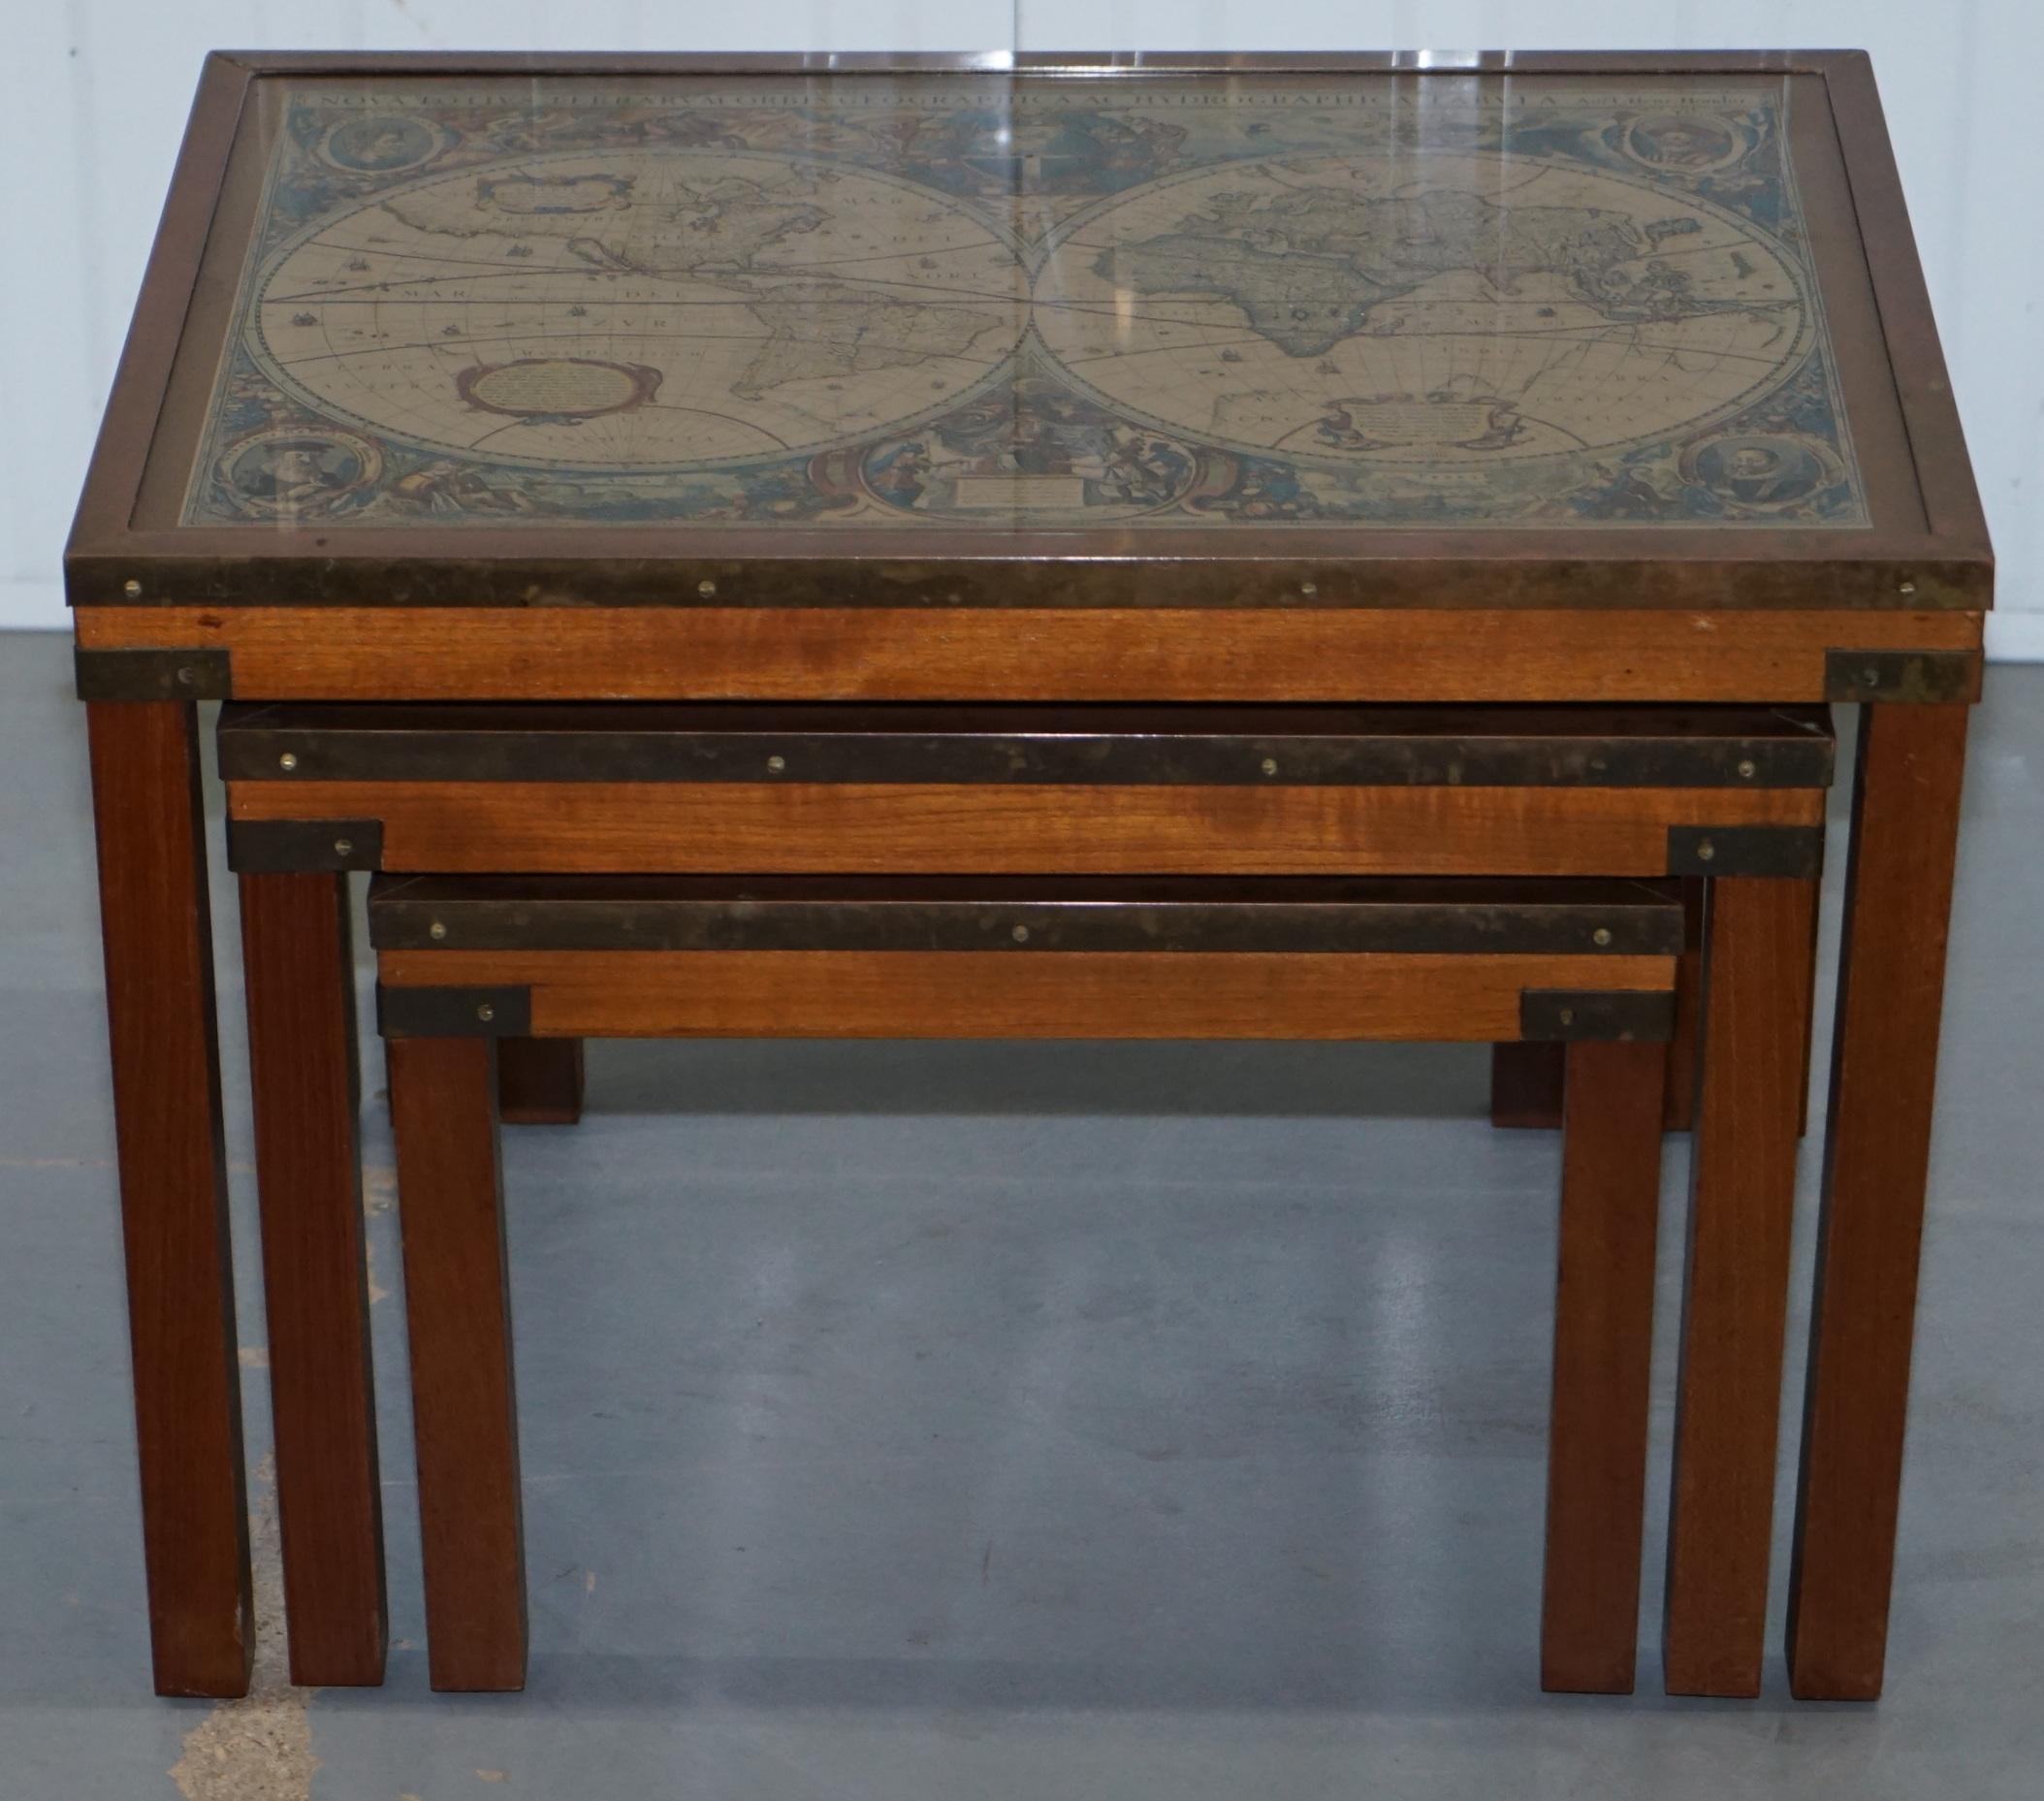 Wimbledon-Furniture

Wimbledon-Furniture is delighted to offer for sale this lovely nest of three campaign tables in the Military style with global maps design

Please note the delivery fee listed is just a guide, it covers within the M25 only,